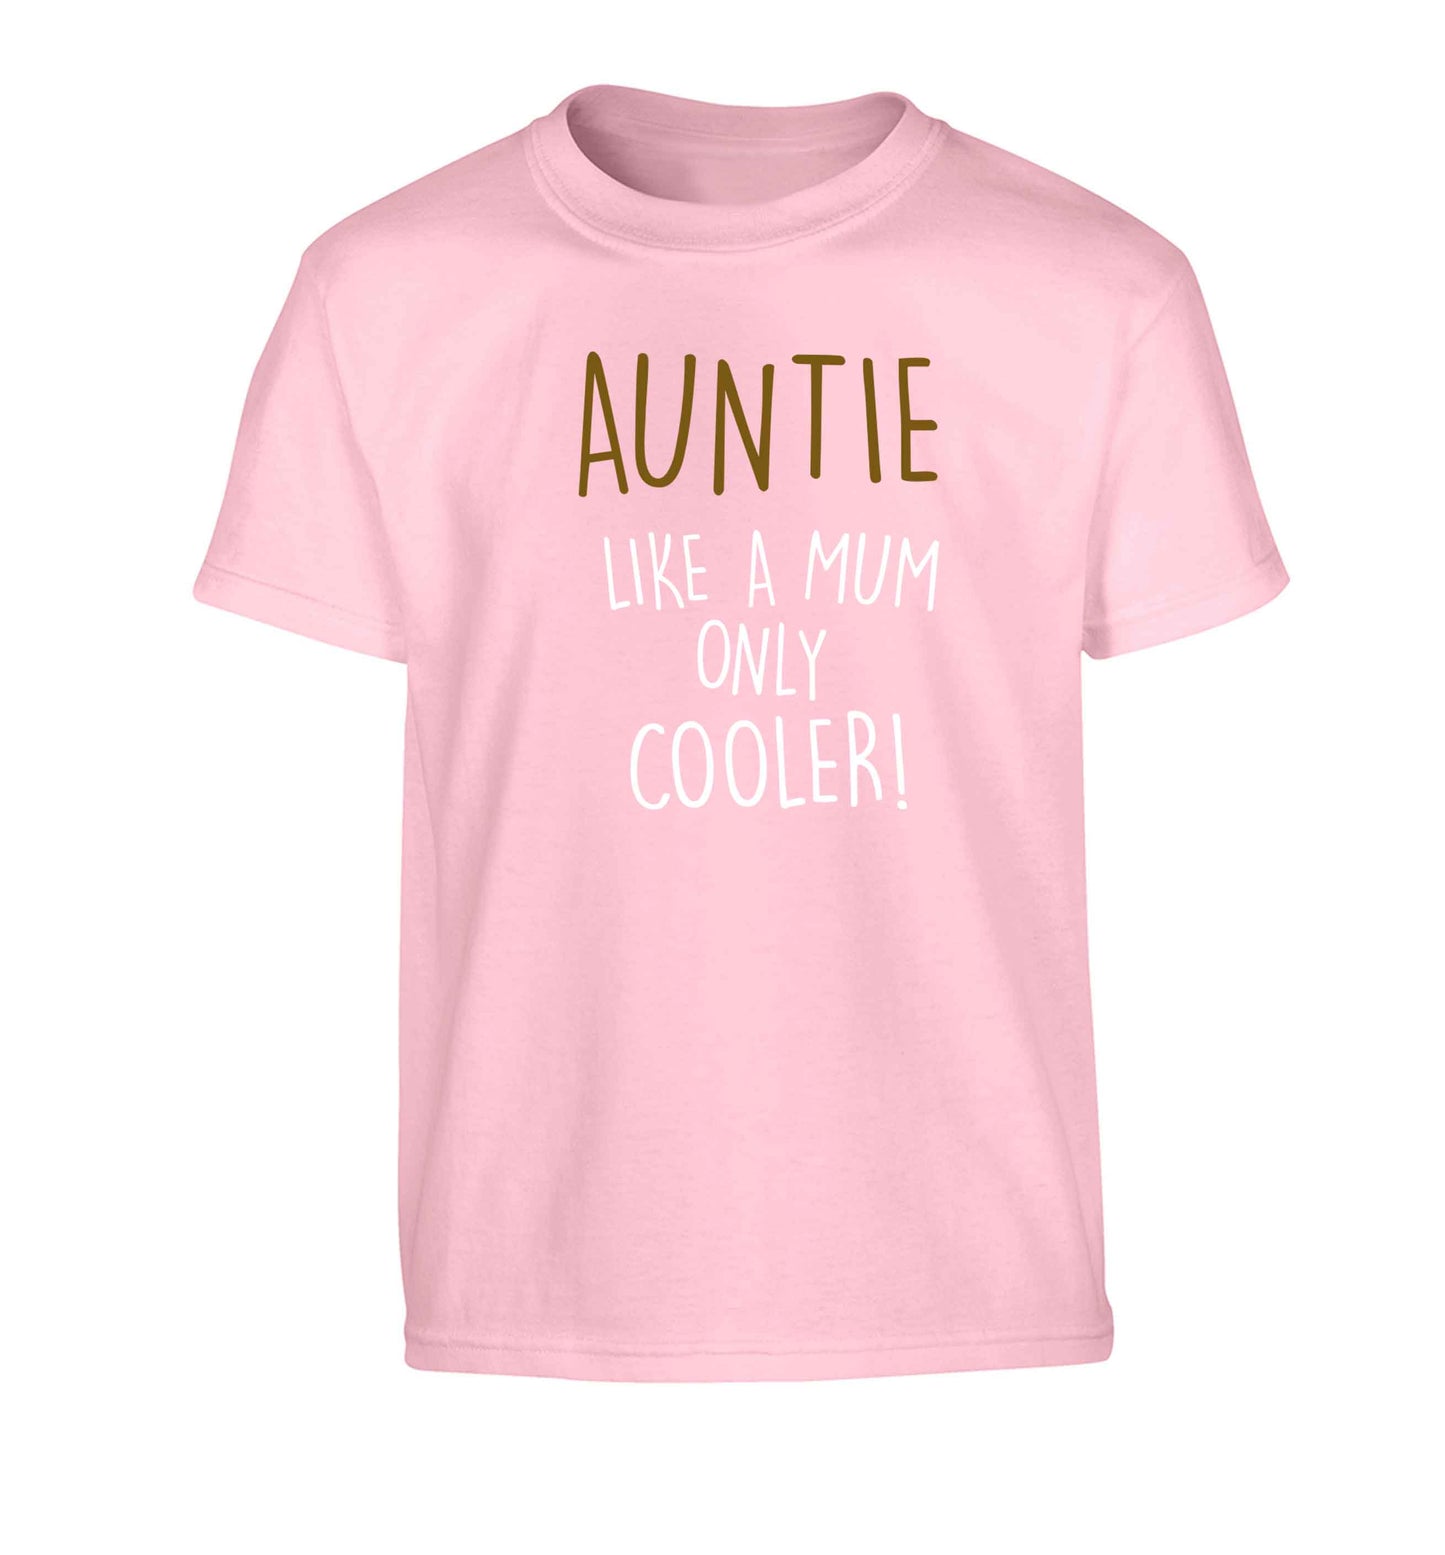 Auntie like a mum only cooler Children's light pink Tshirt 12-13 Years